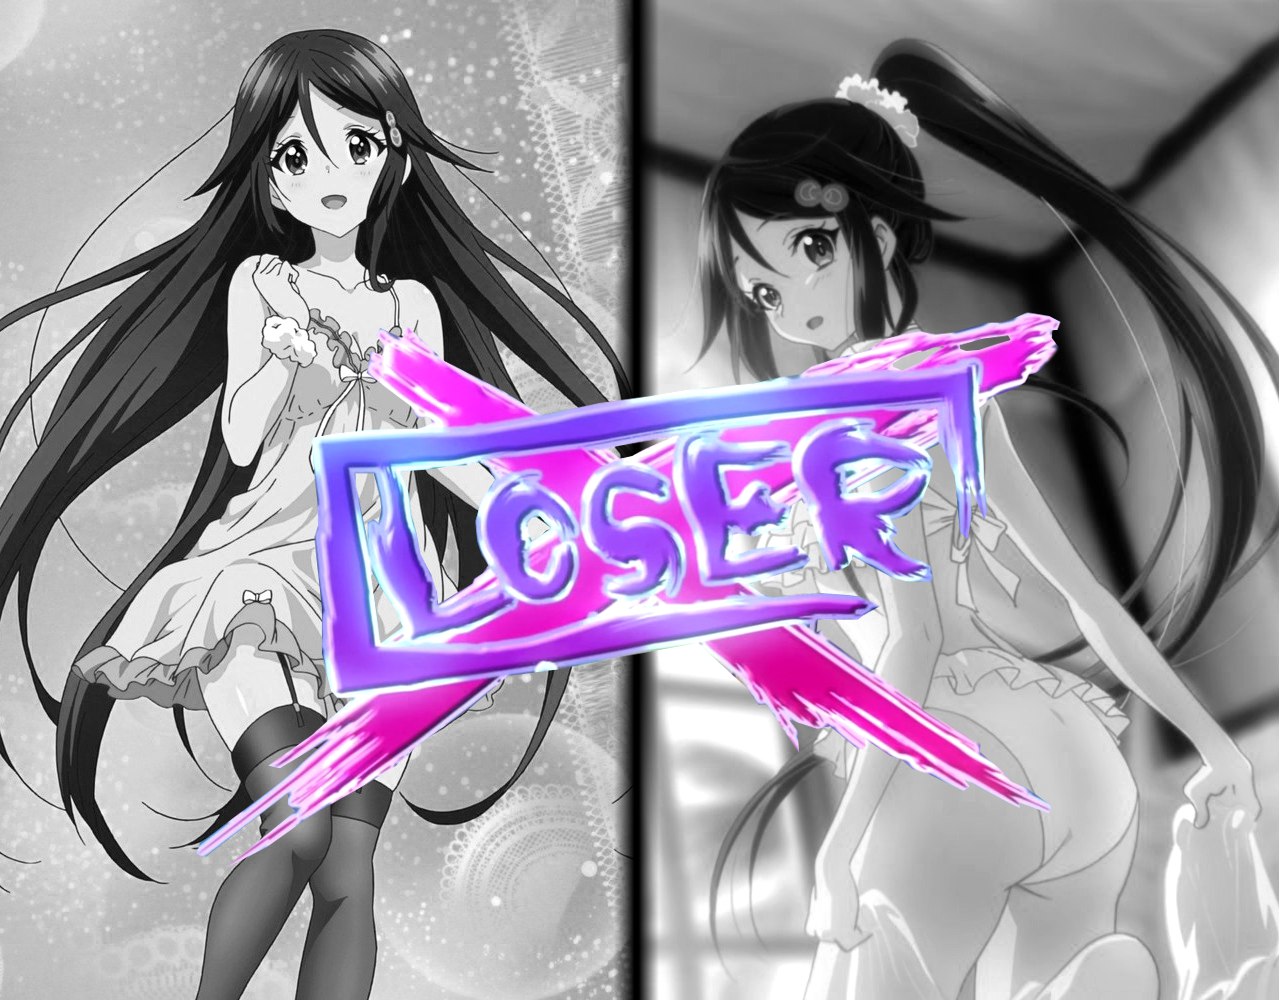 Losers - Reina